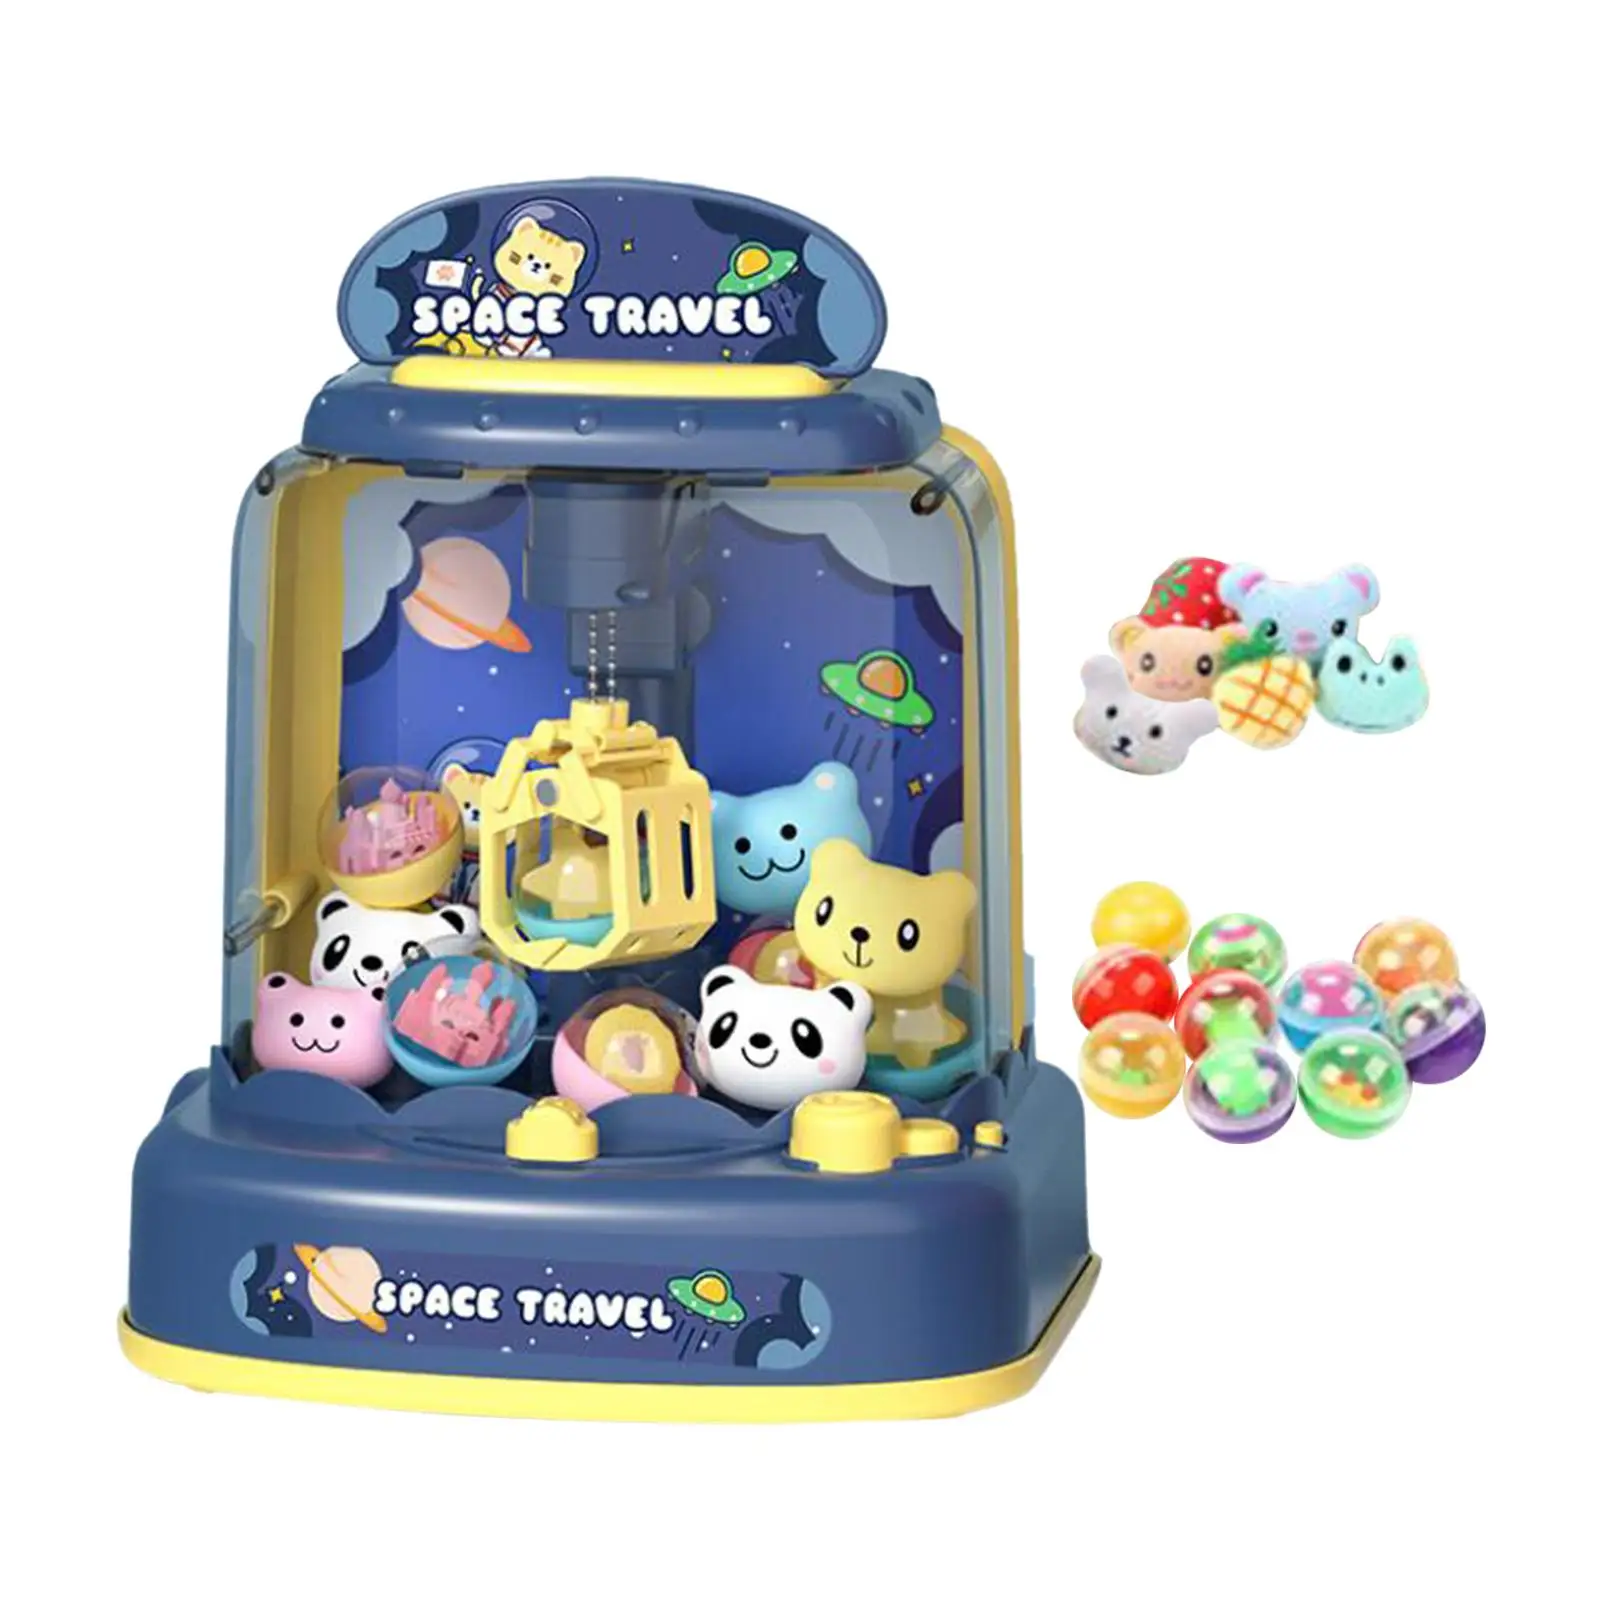 Novelty Kids Small Claw Machine Electronic Arcade Game Favors Doll Machine with Sounds for Kids Girls 6 7 8 9 Year Old Boys